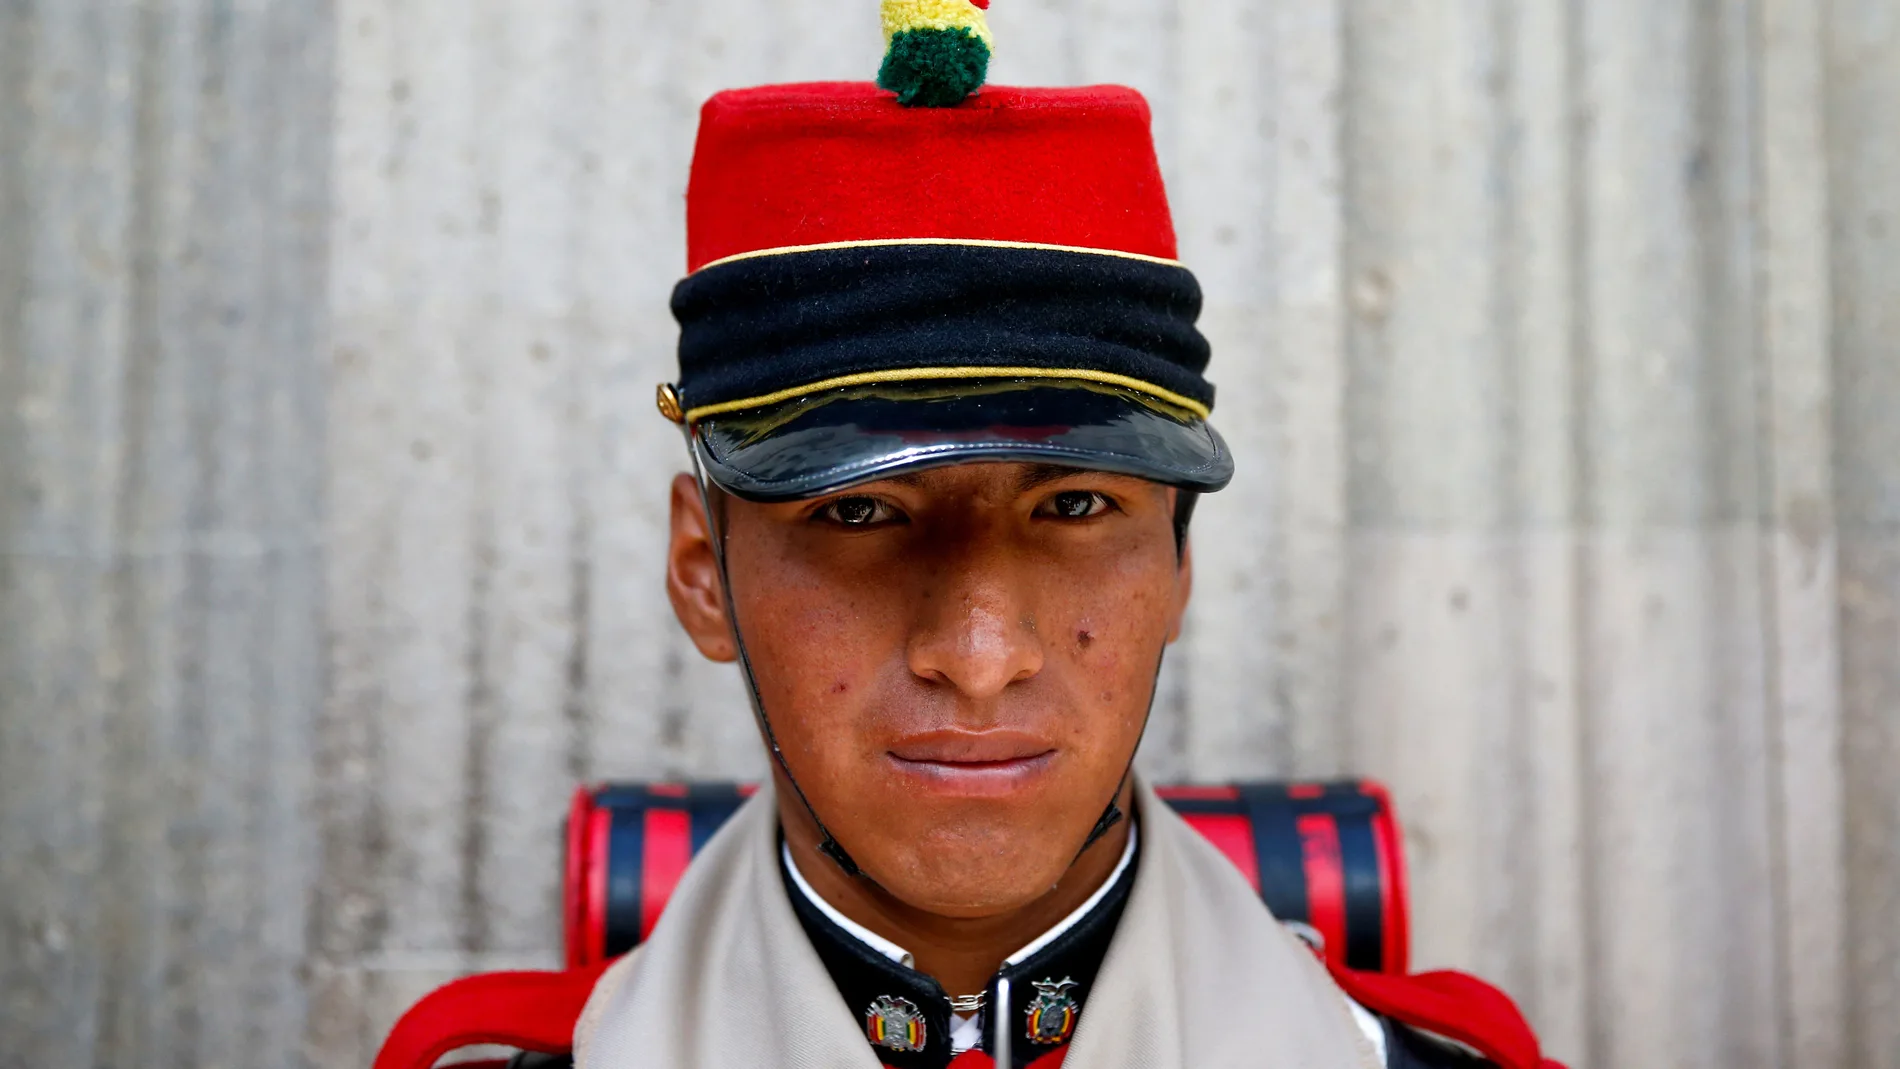 A member of Bolivia's presidential guard stands outside the presidential palace in La Paz